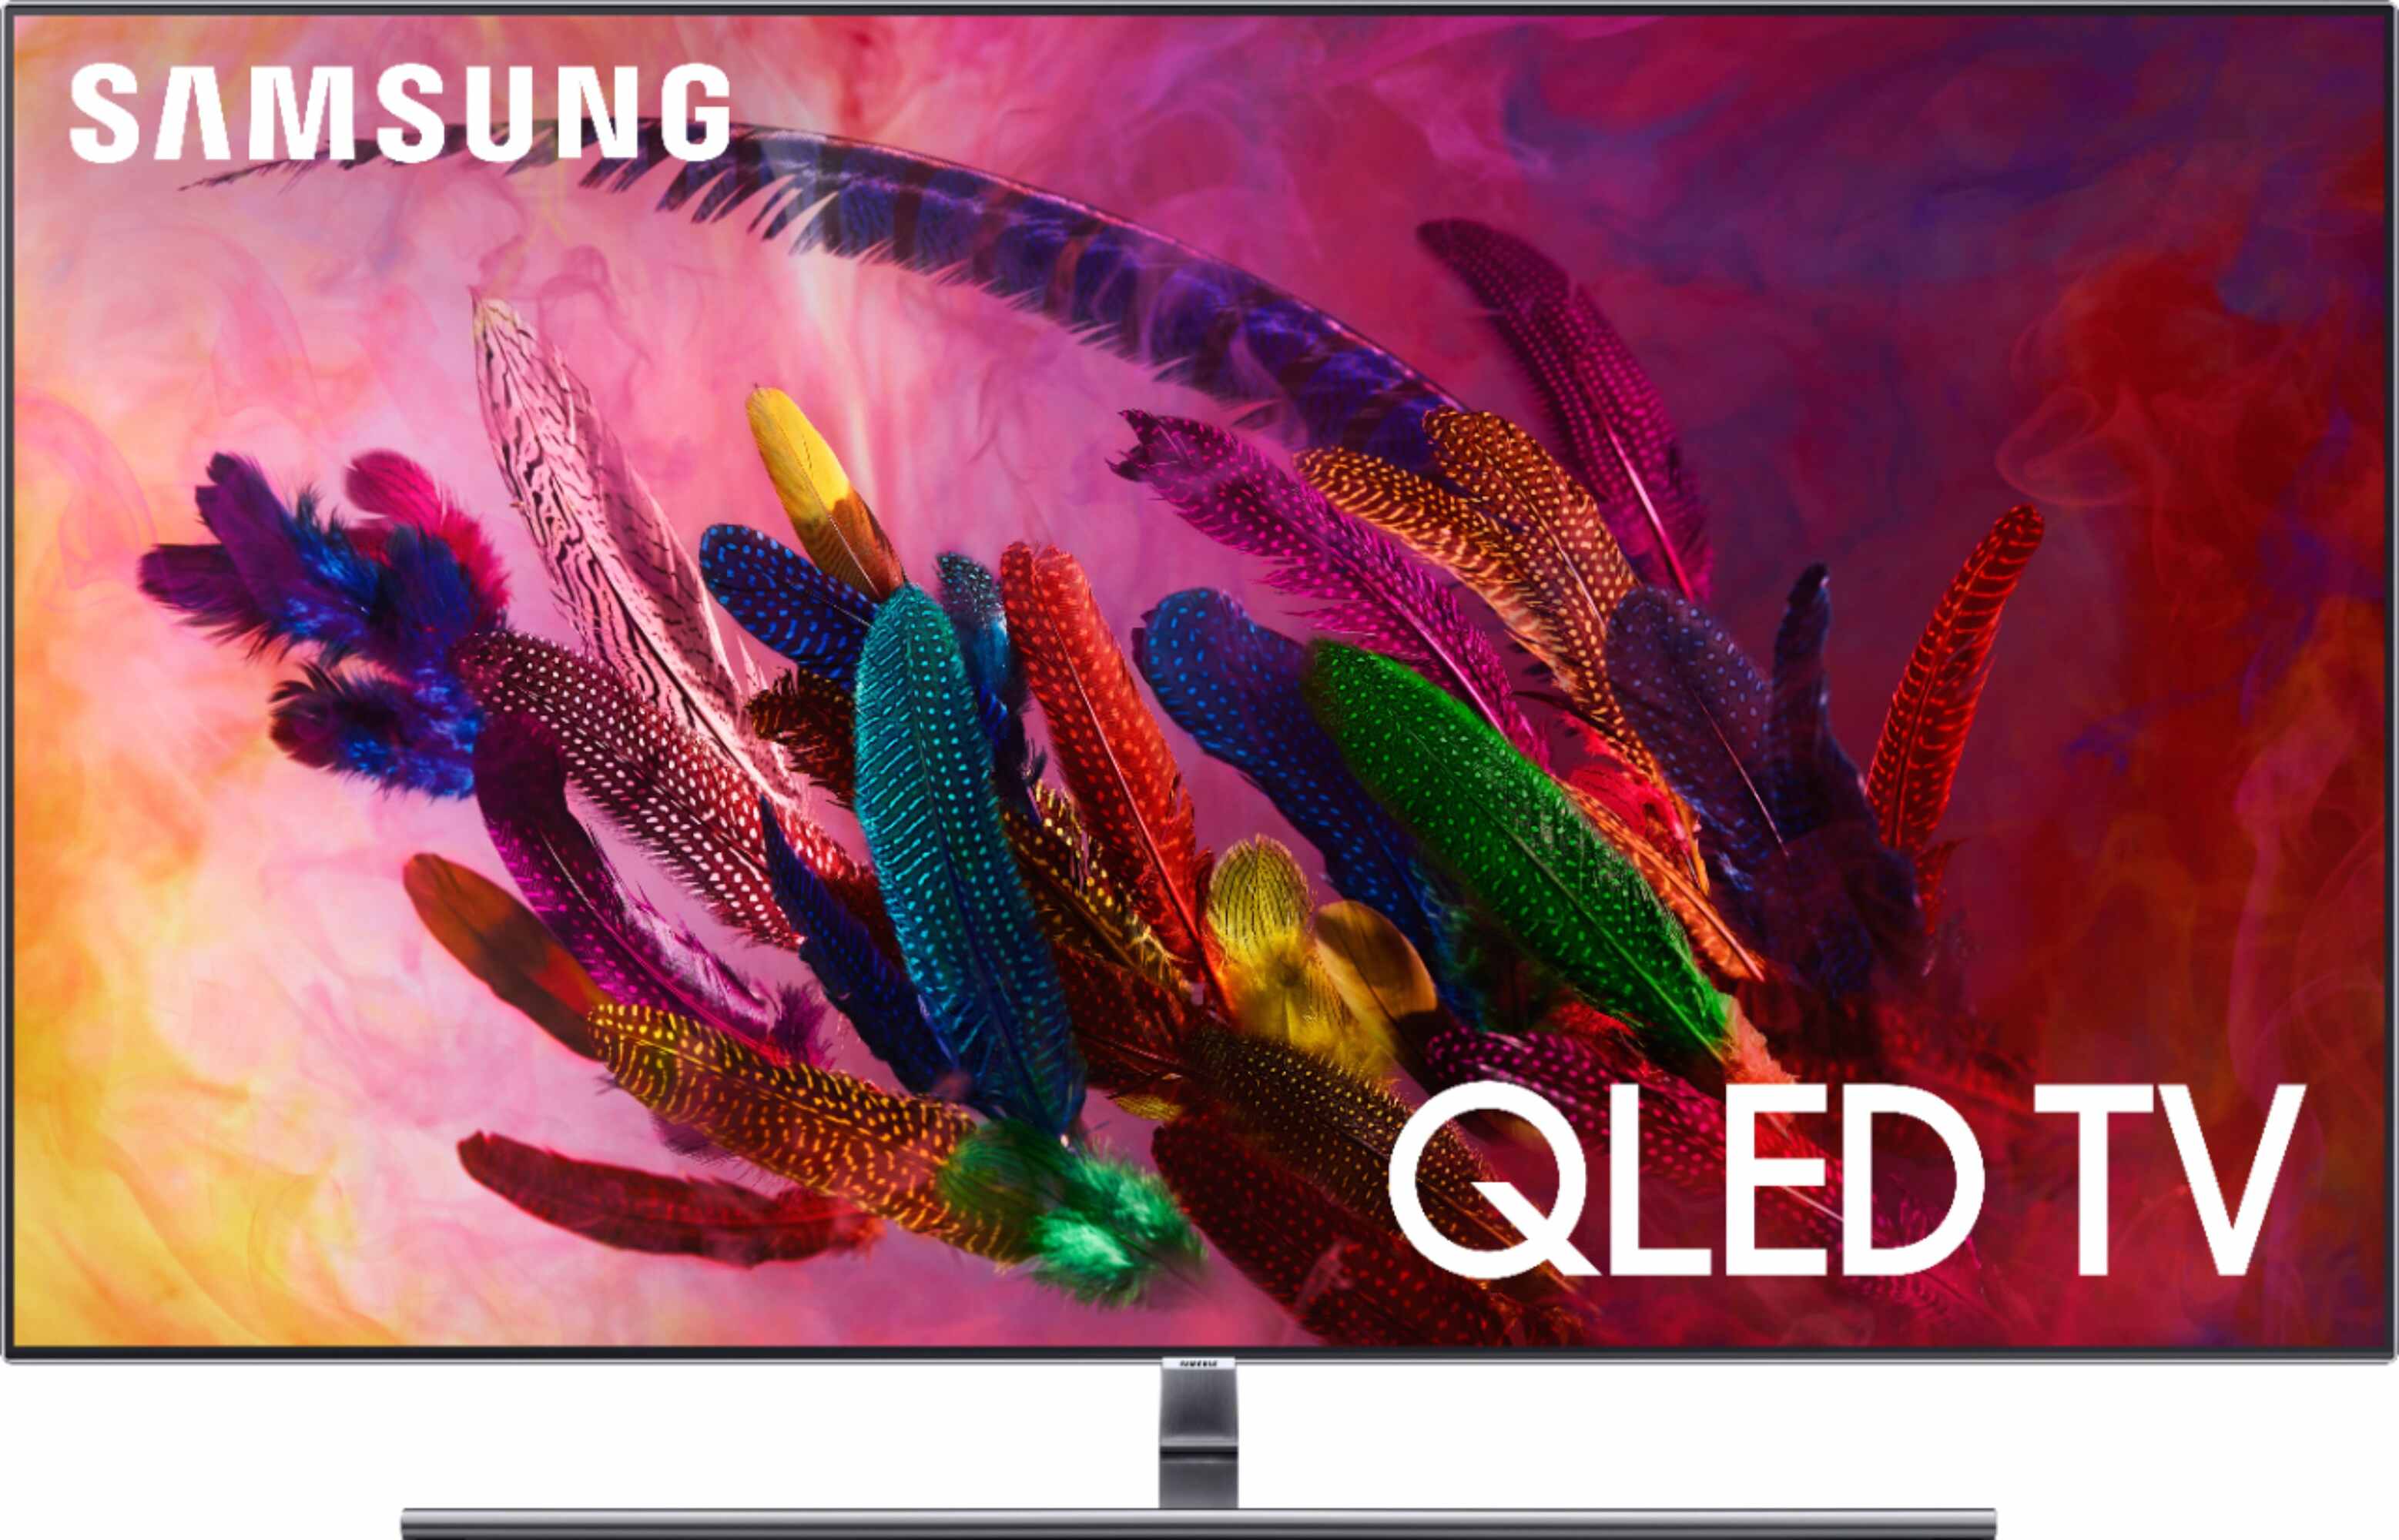 what-accessories-come-in-the-box-of-a-new-samsung-qled-tv-qn55q7fdmfxza